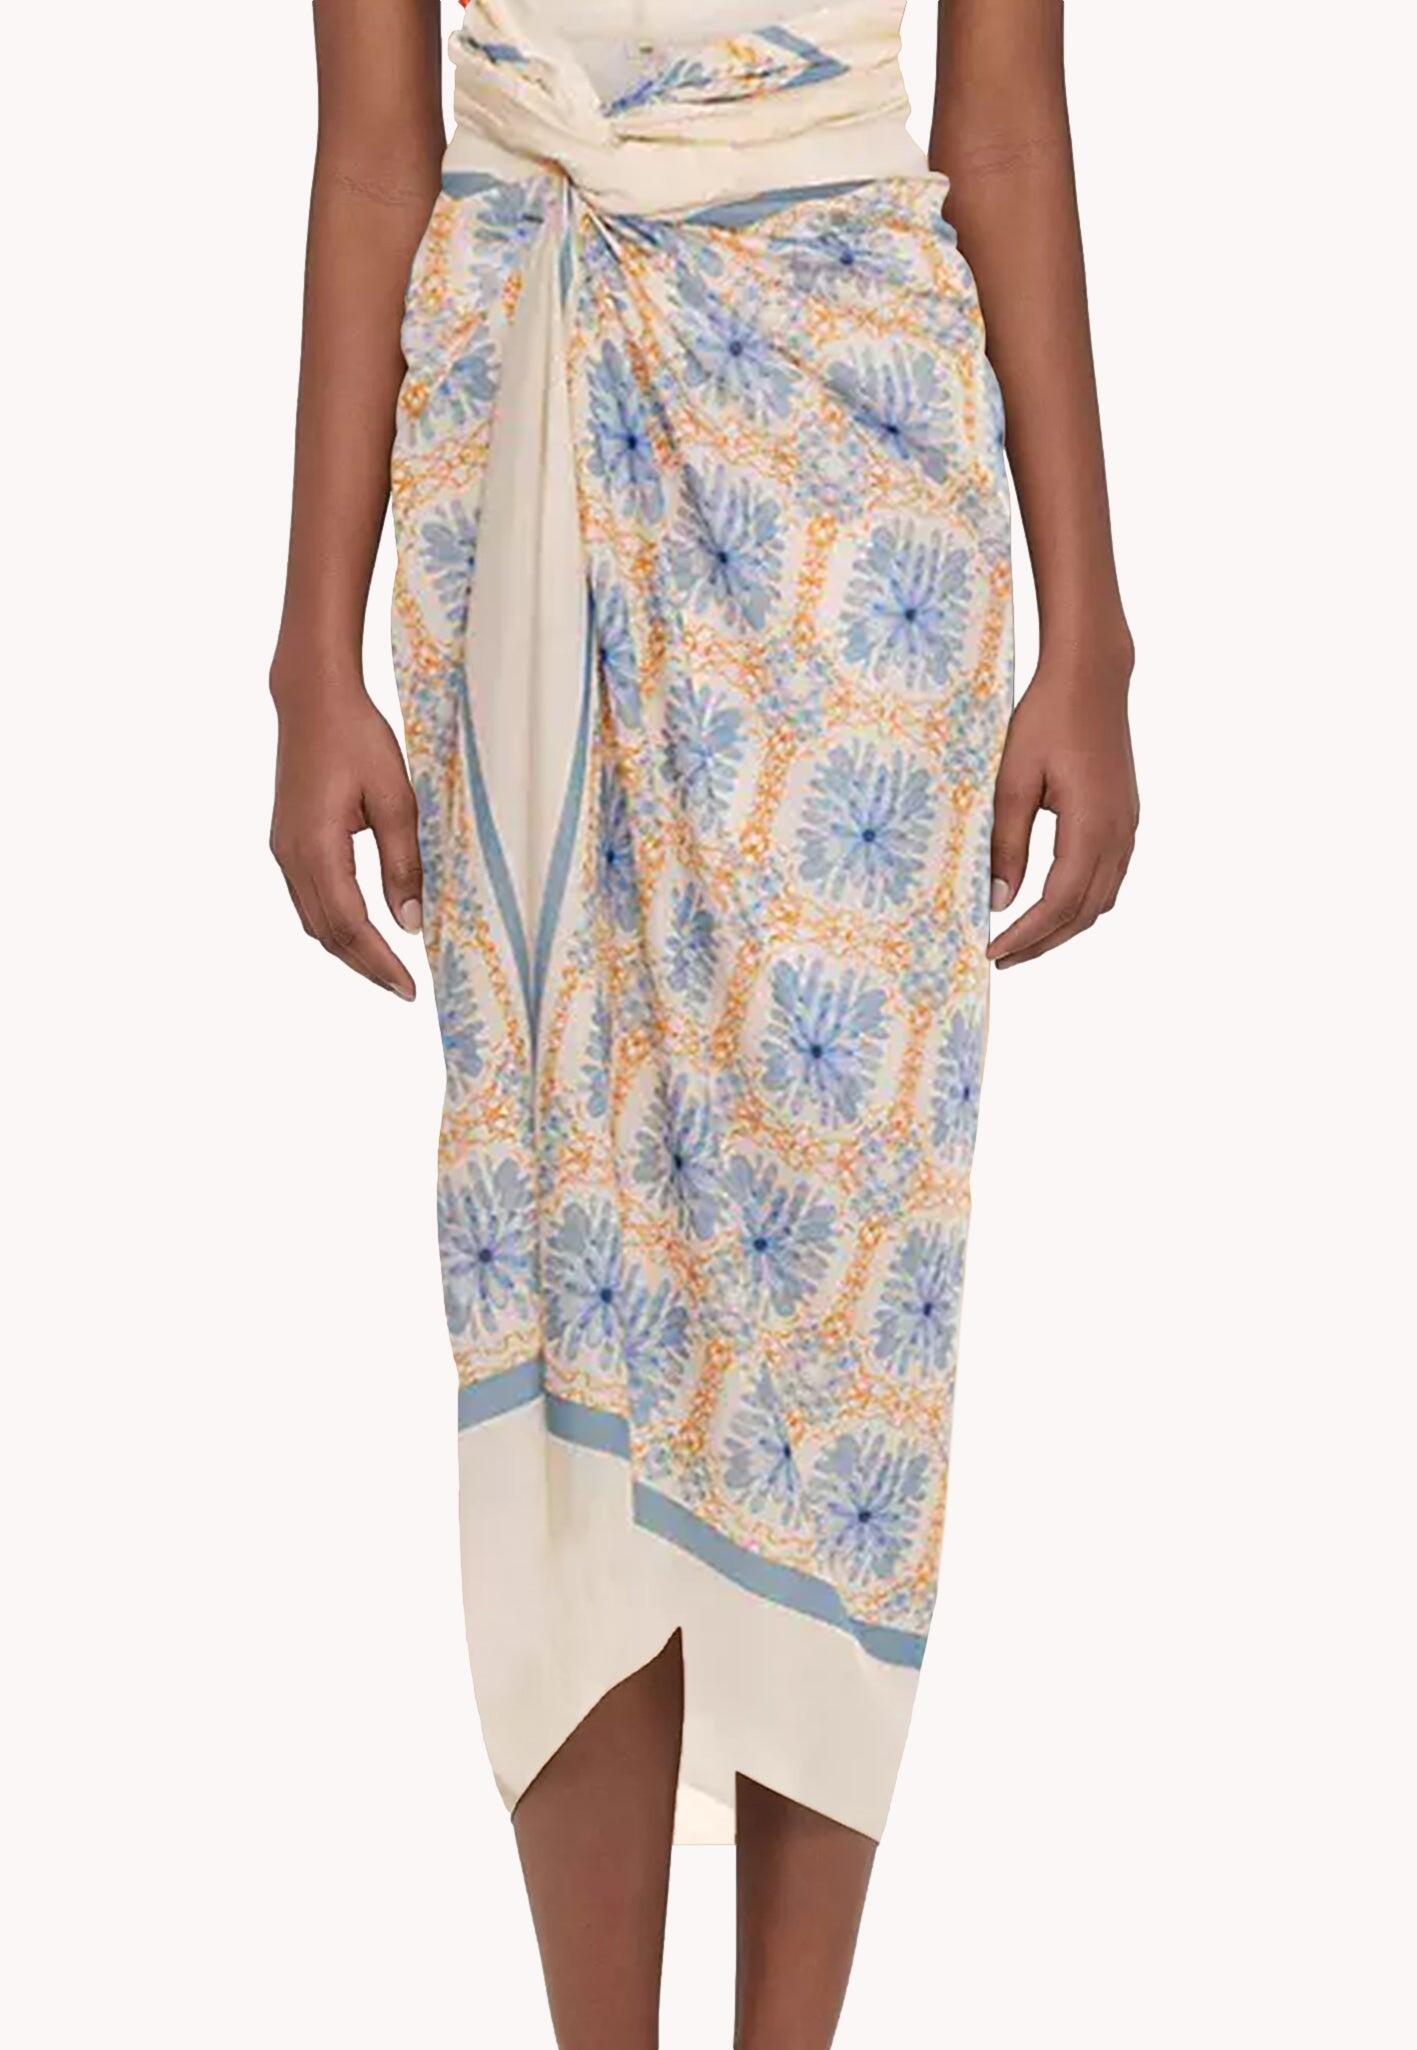 Swimming Cover Up Skirt in Floral Print